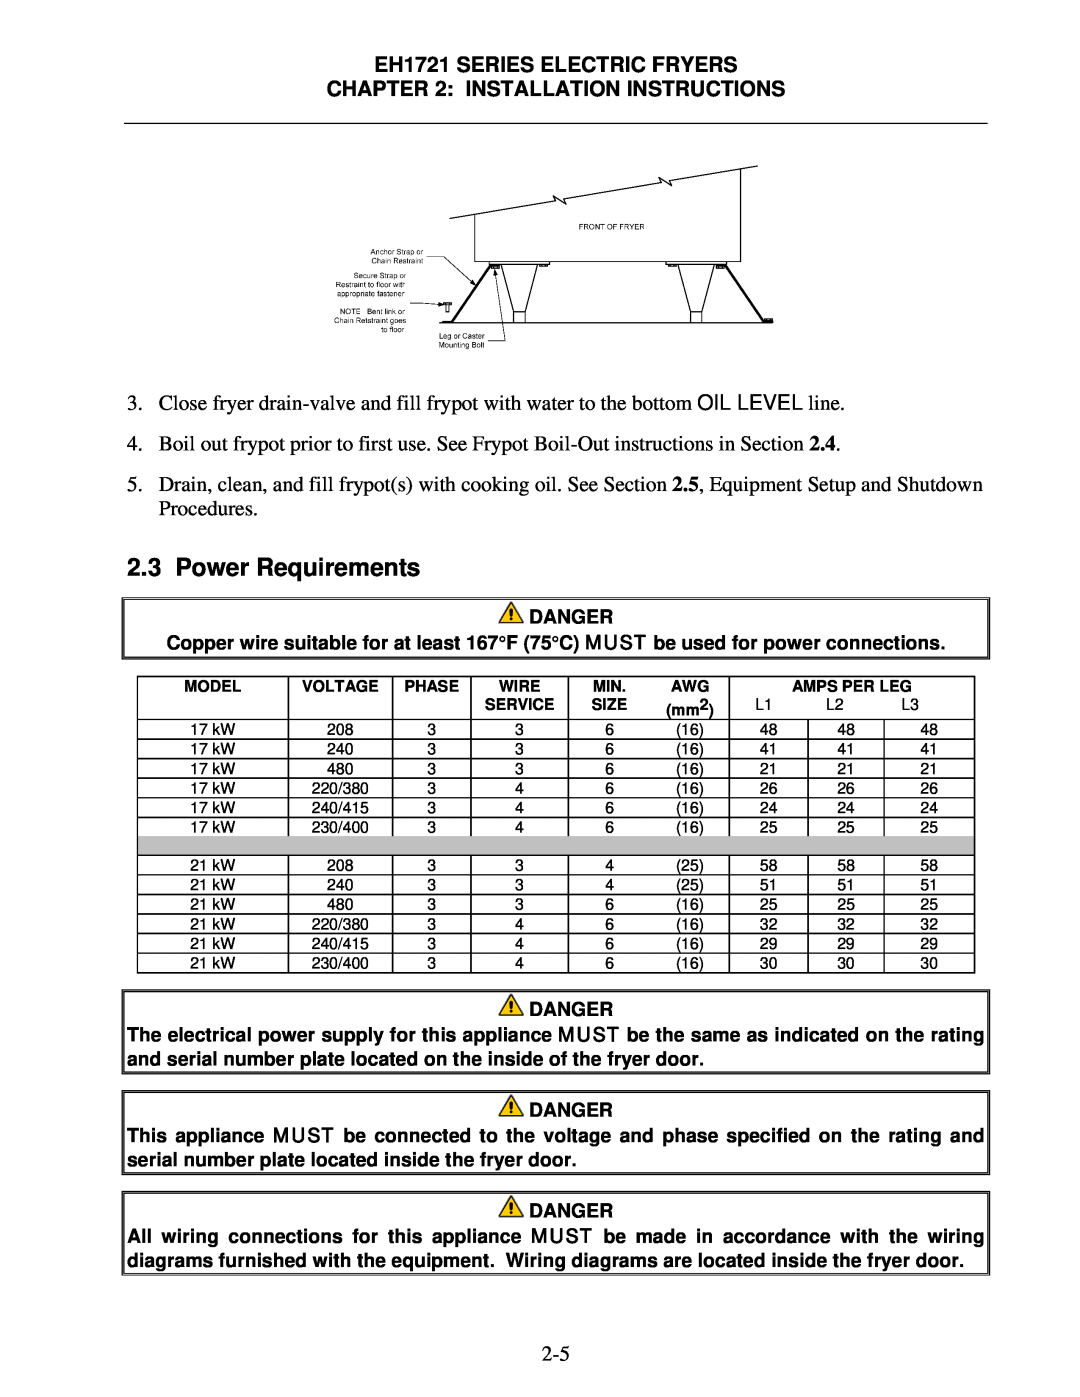 Frymaster EH1721 SERIES operation manual Power Requirements 